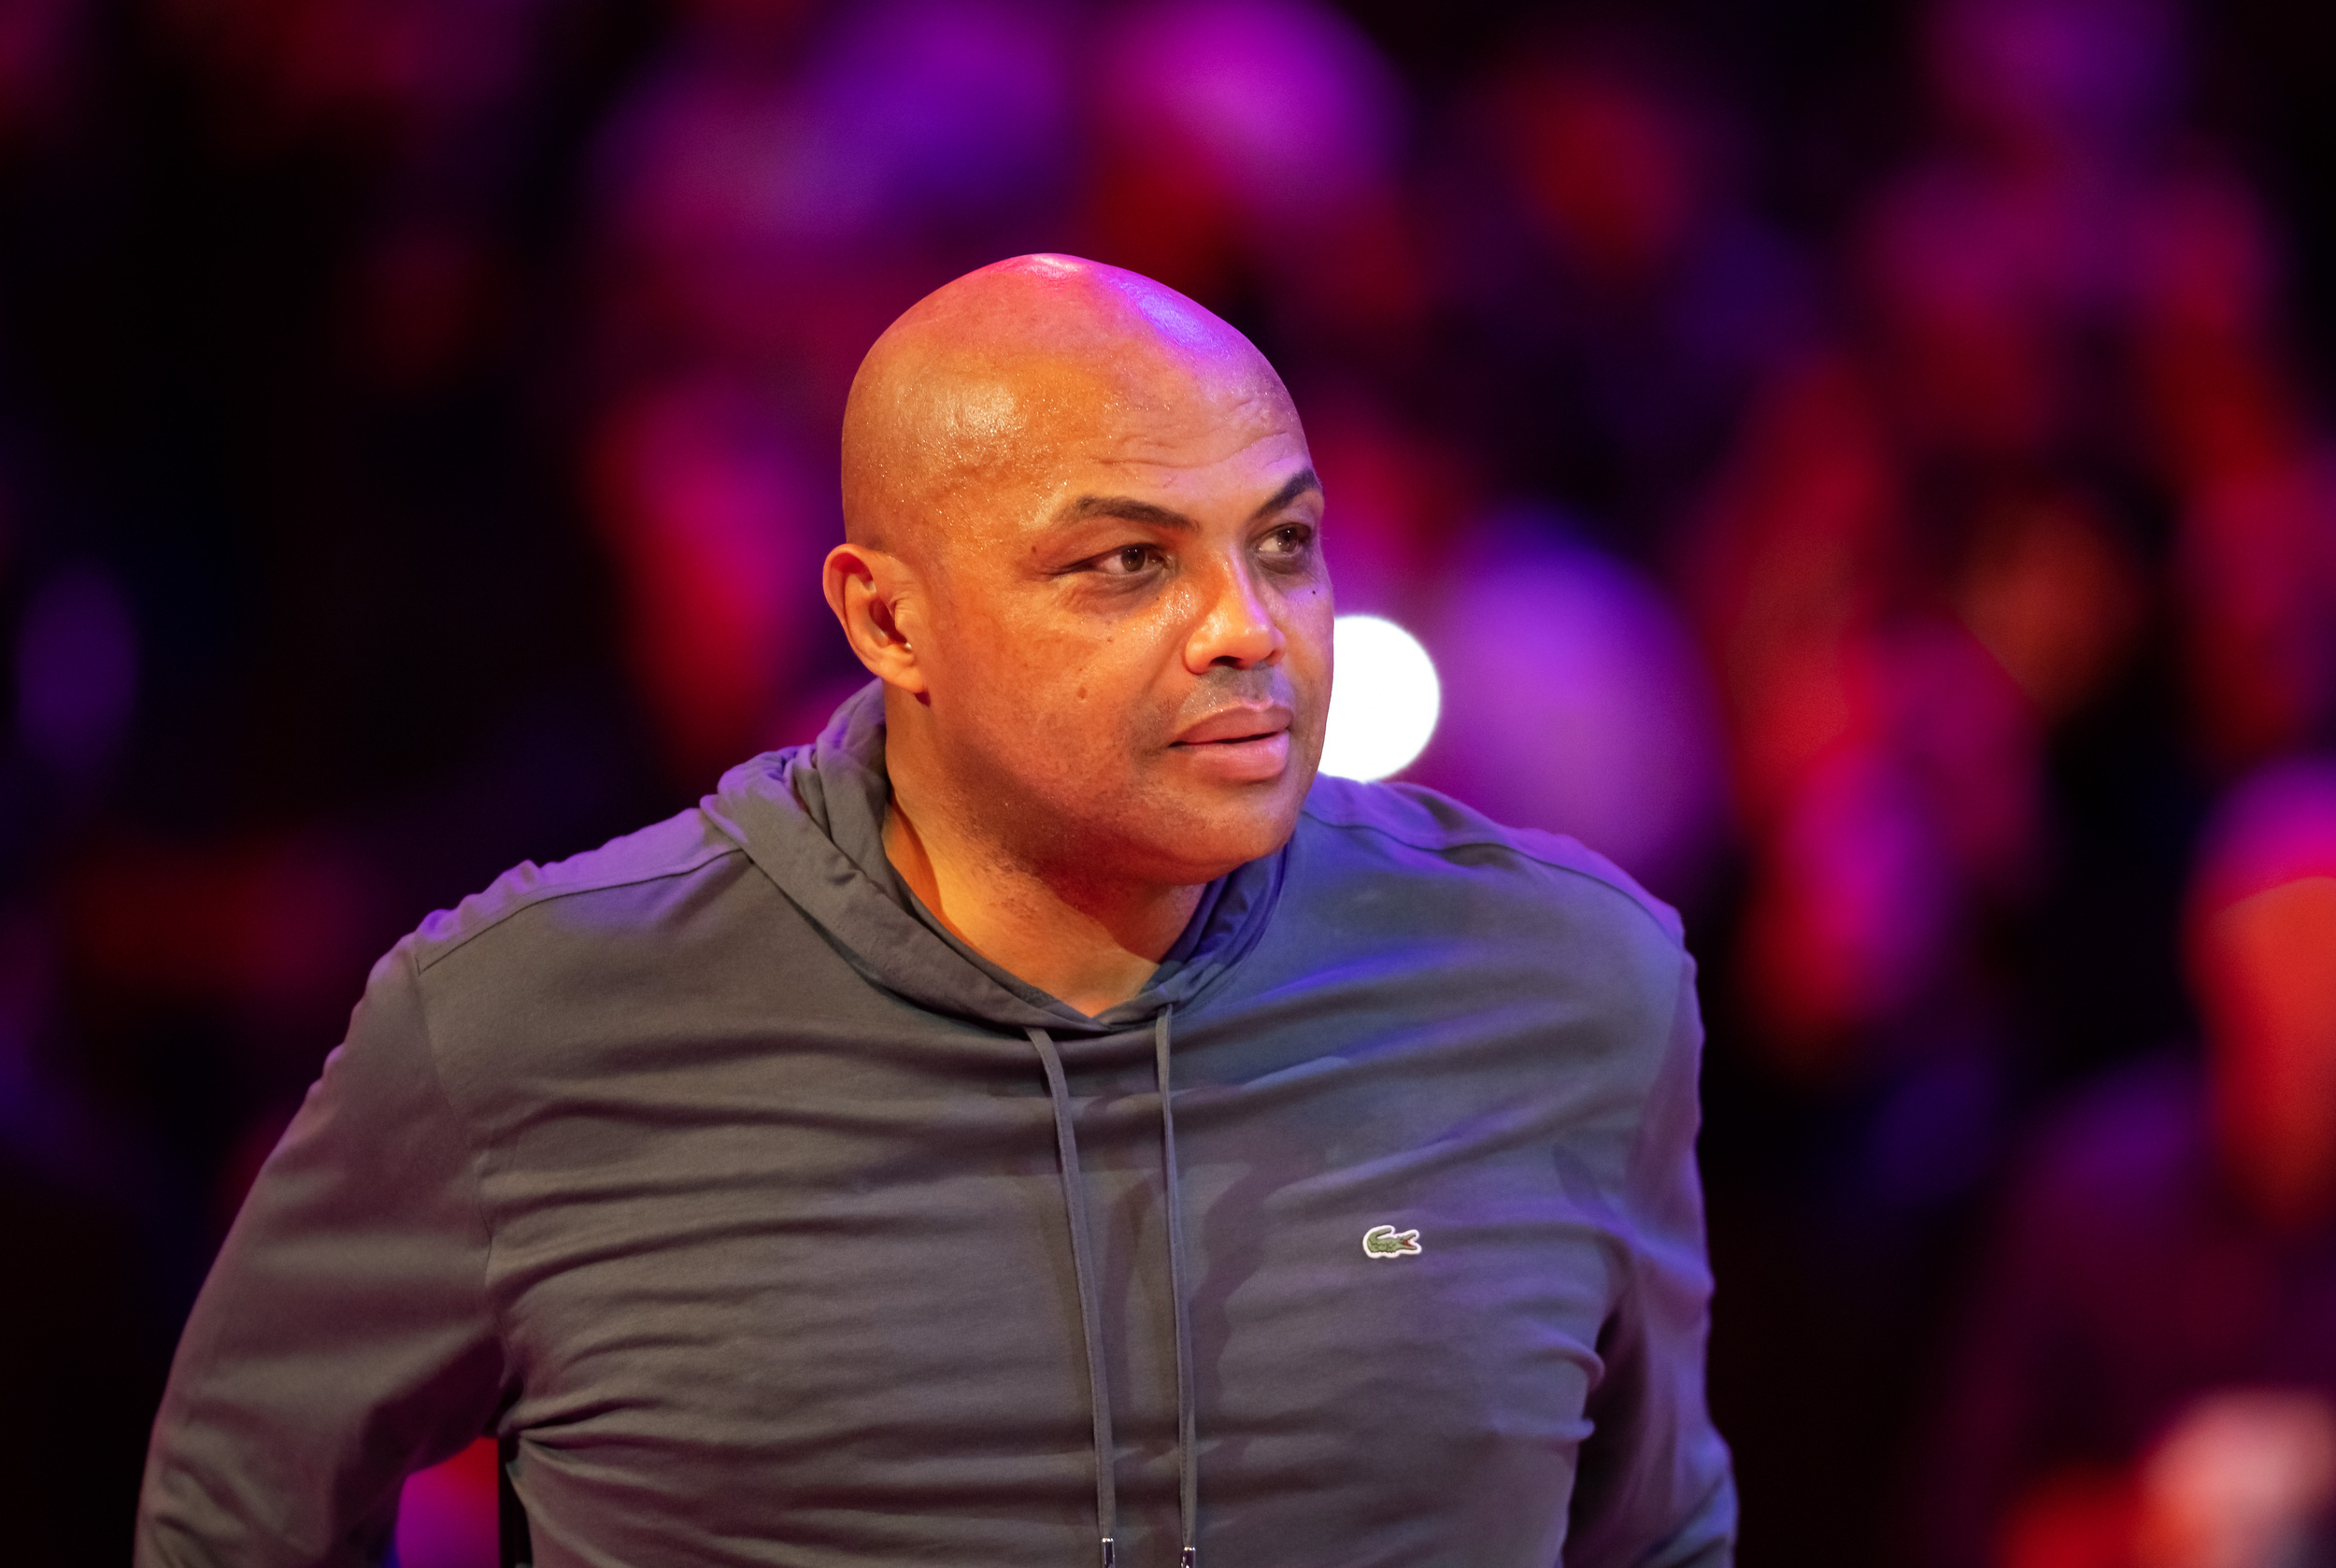 charles barkley slams lakers for blaming refs after game 2 loss